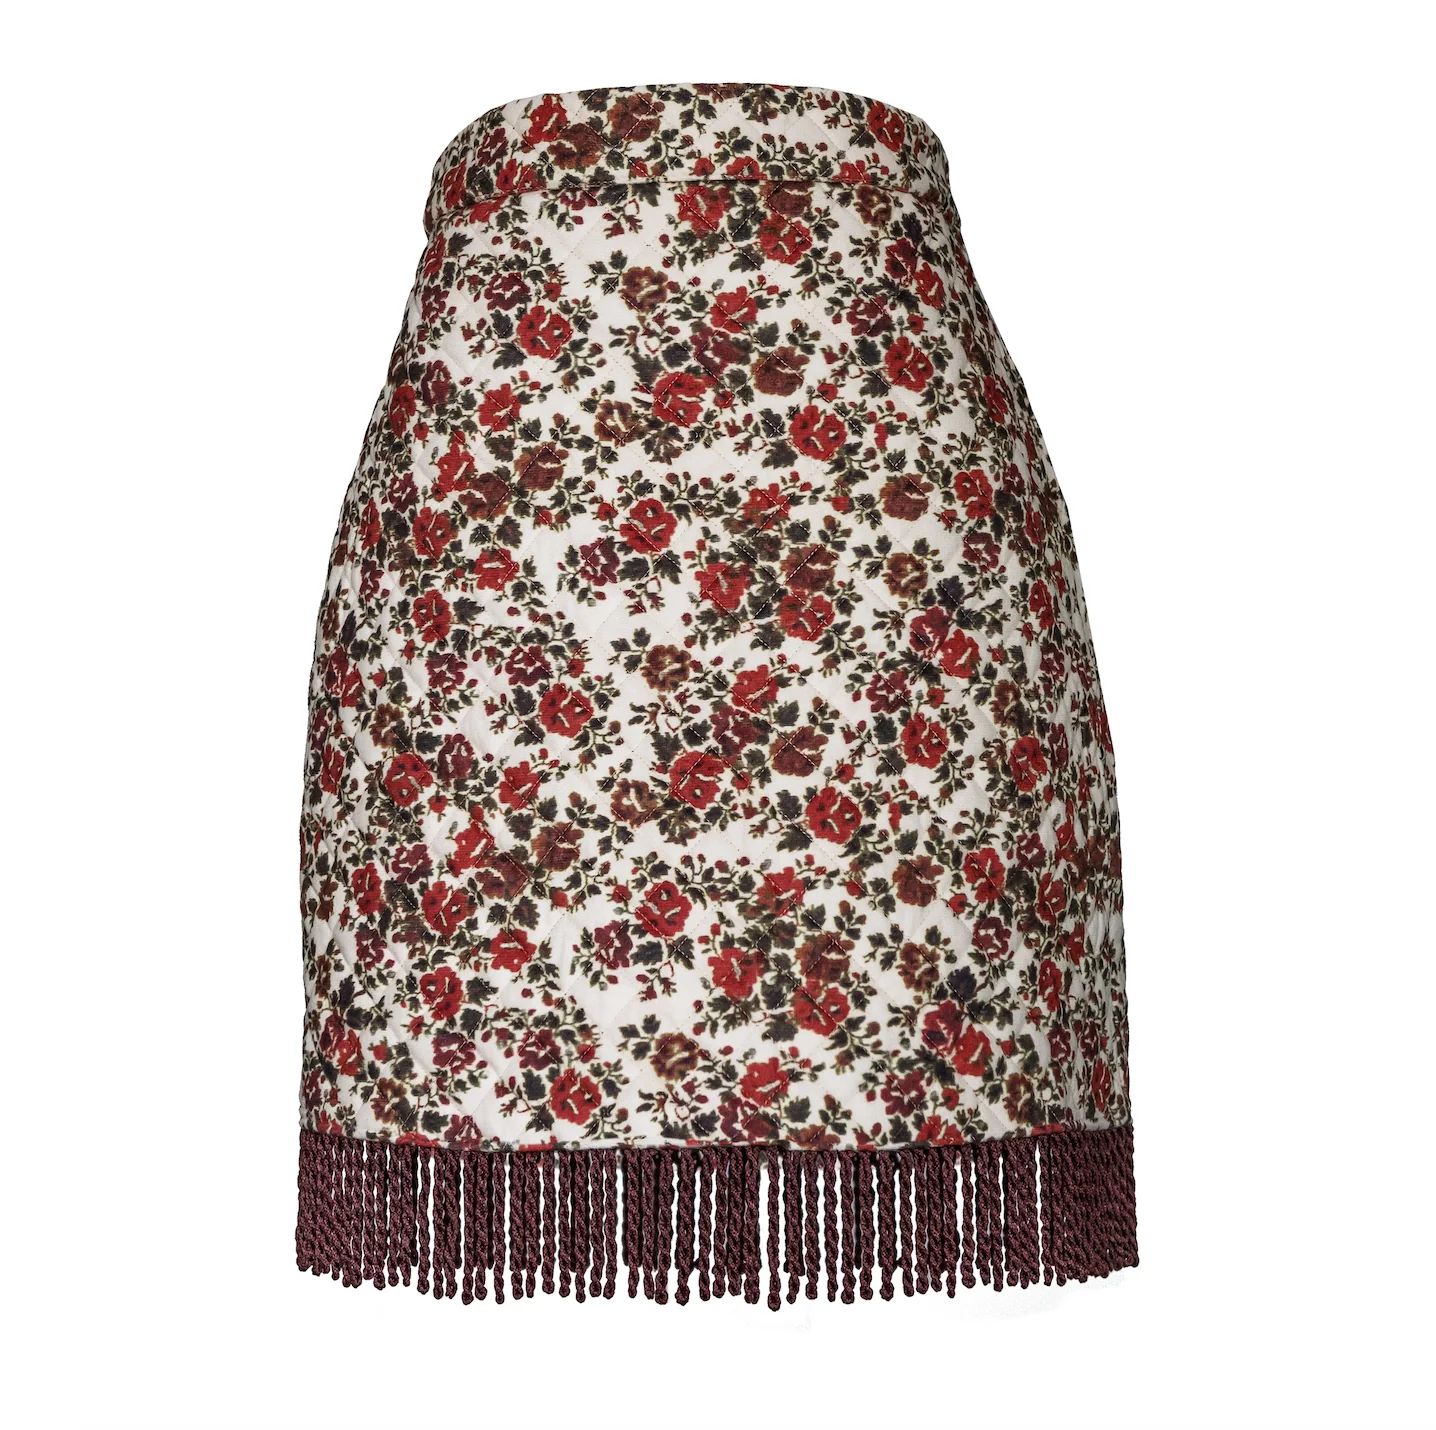 Remi Skirt, Quilted Floral Printed Velvet | The Avenue